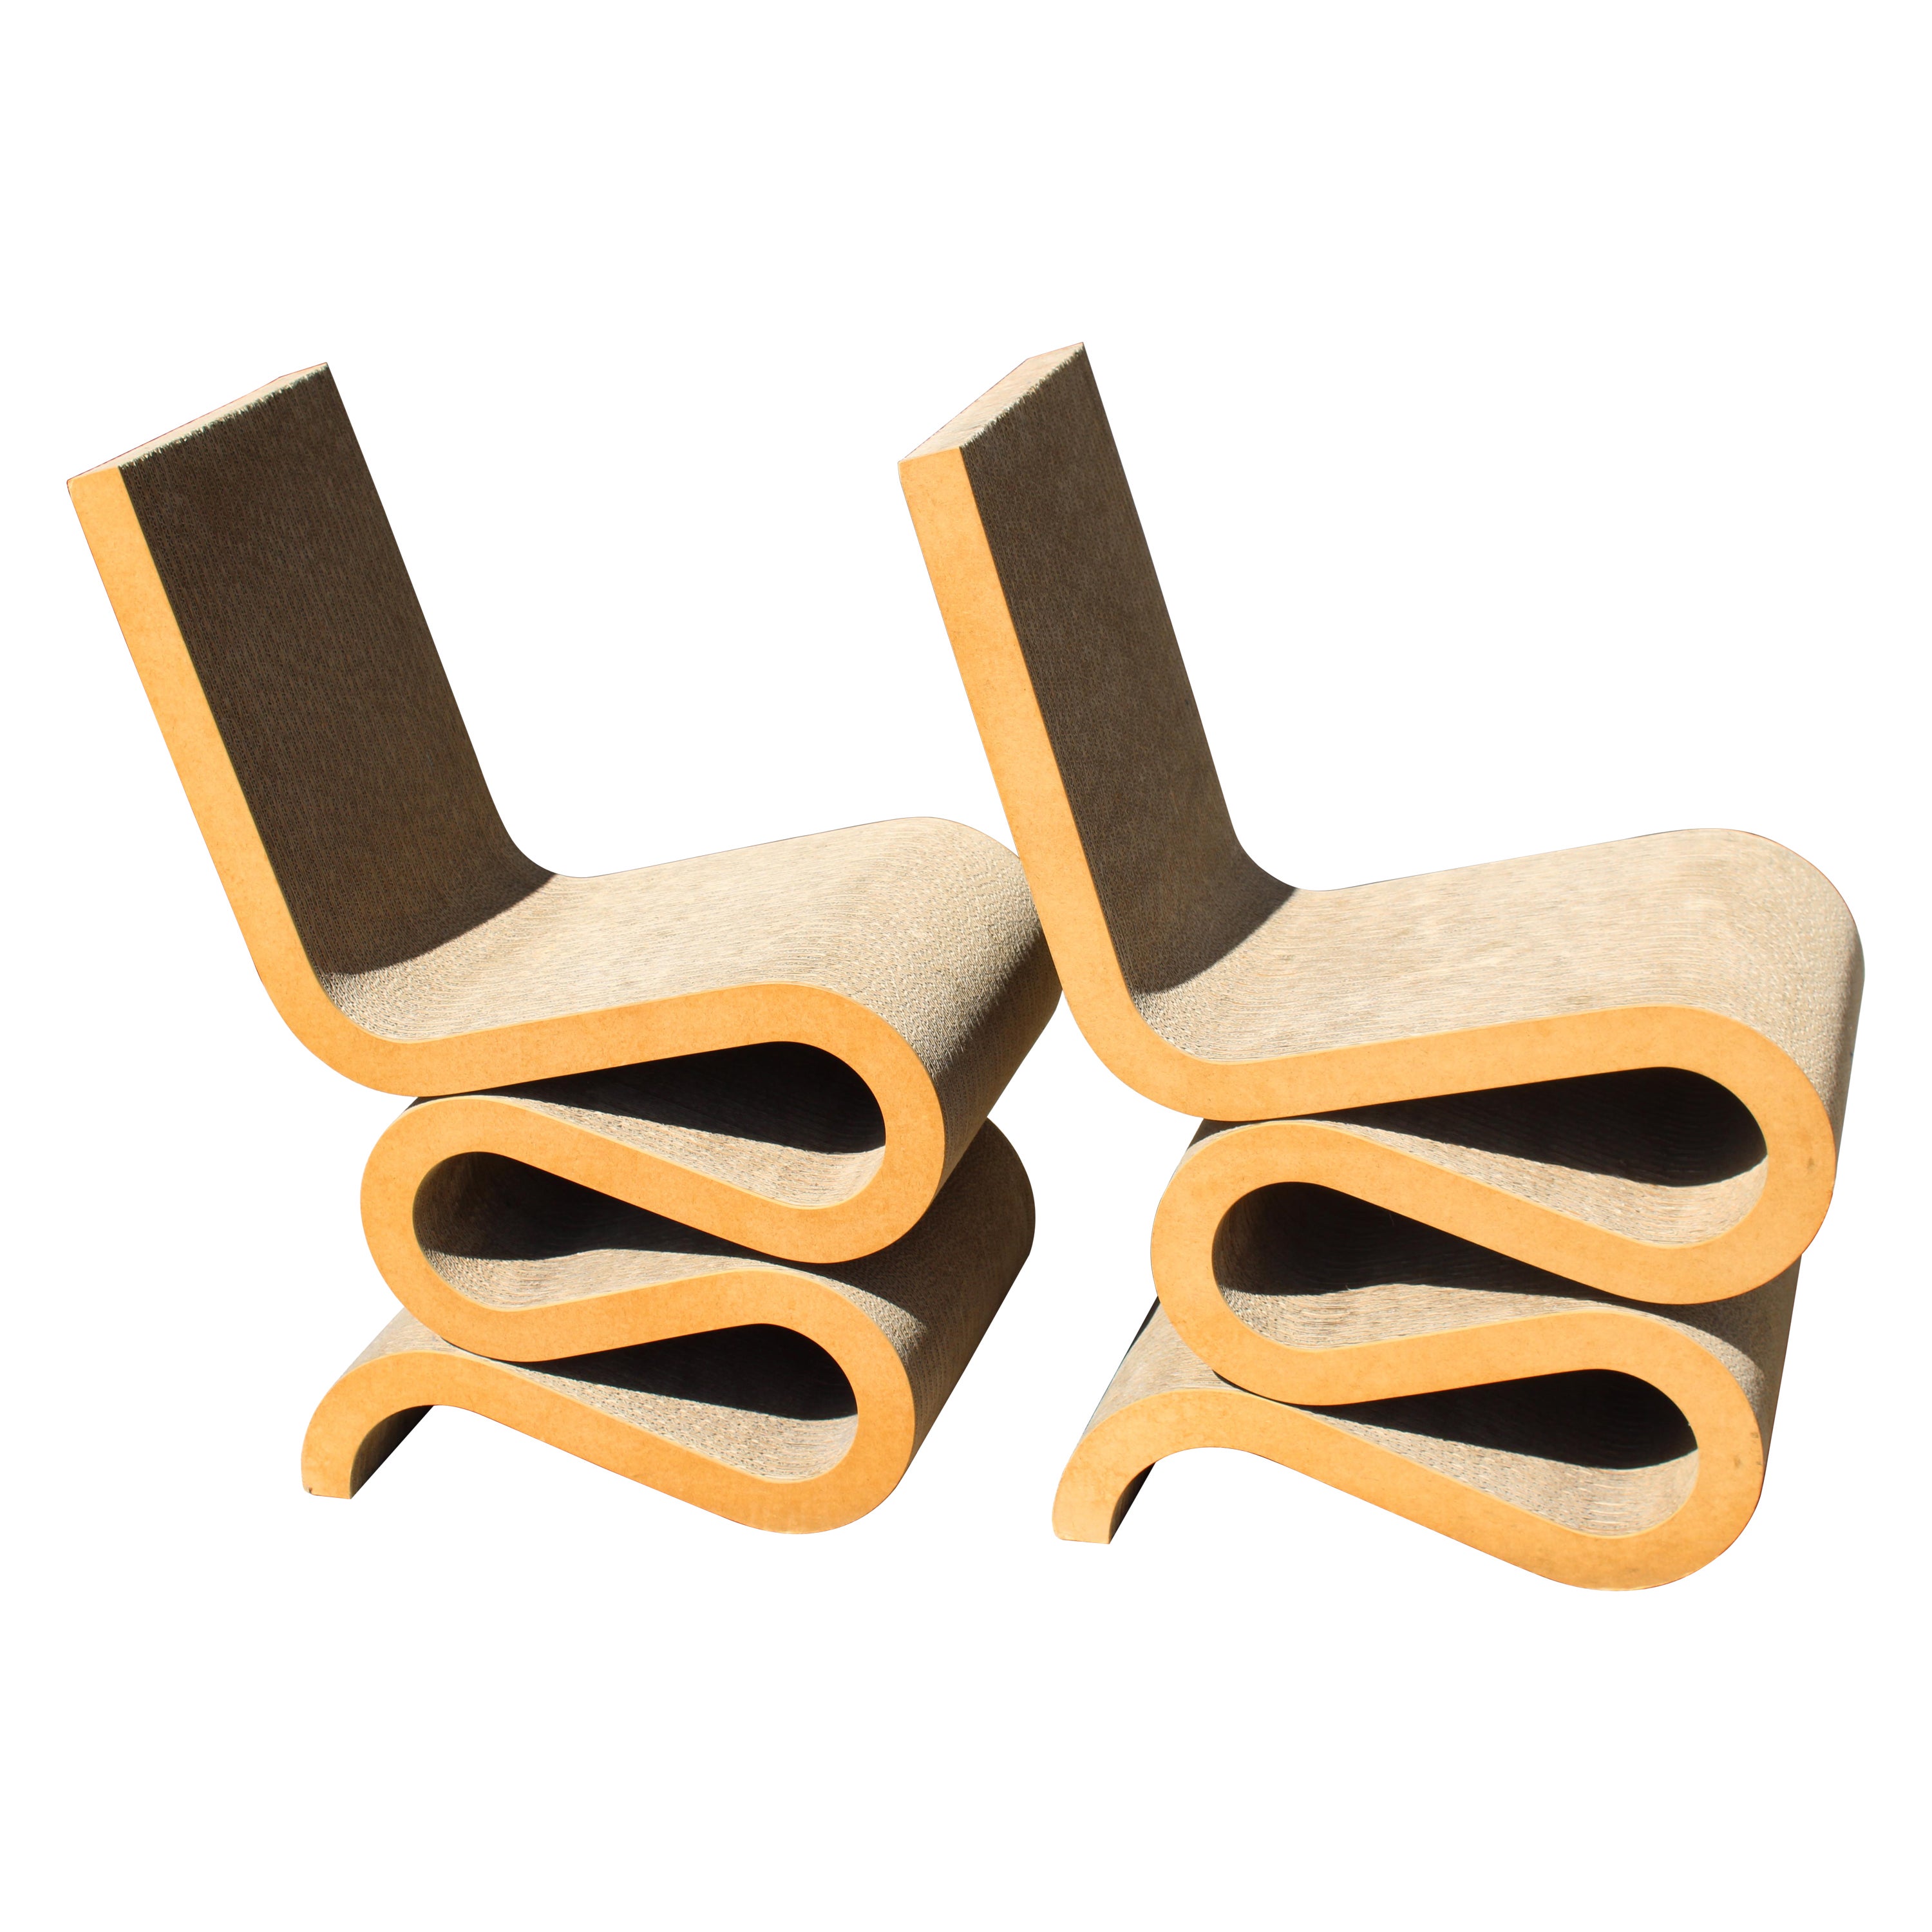 Pair of Vitra Wiggle Chairs Designed by Frank Gehry